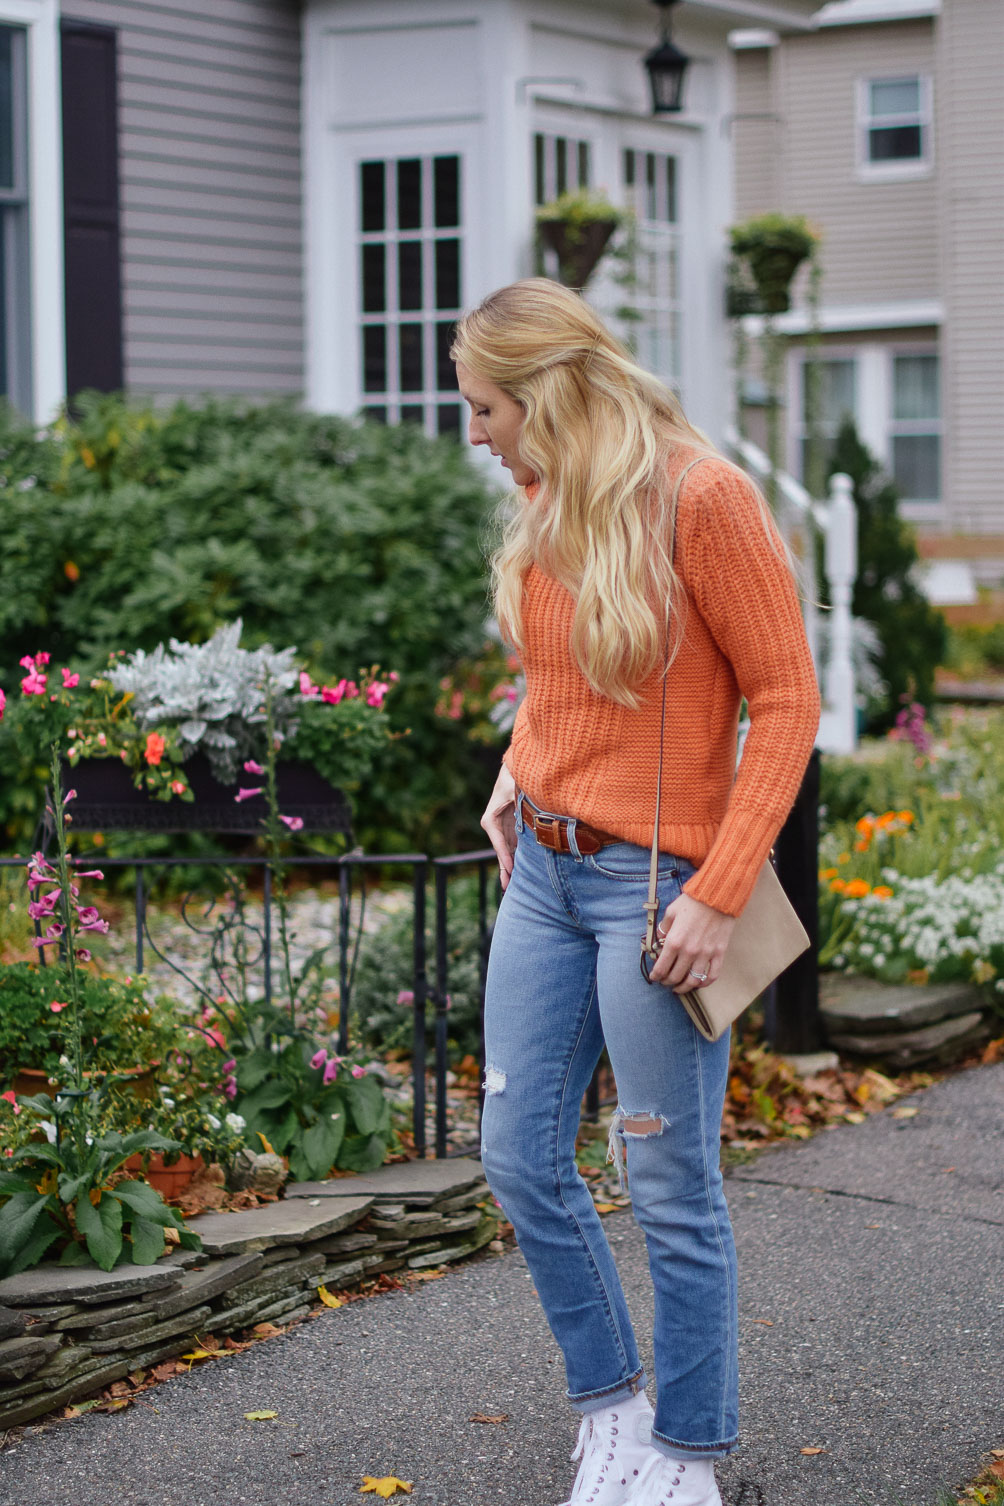 Leslie Musser dressing for sweater weather in an orange turtleneck and real straight jeans with high top sneakers on one brass fox